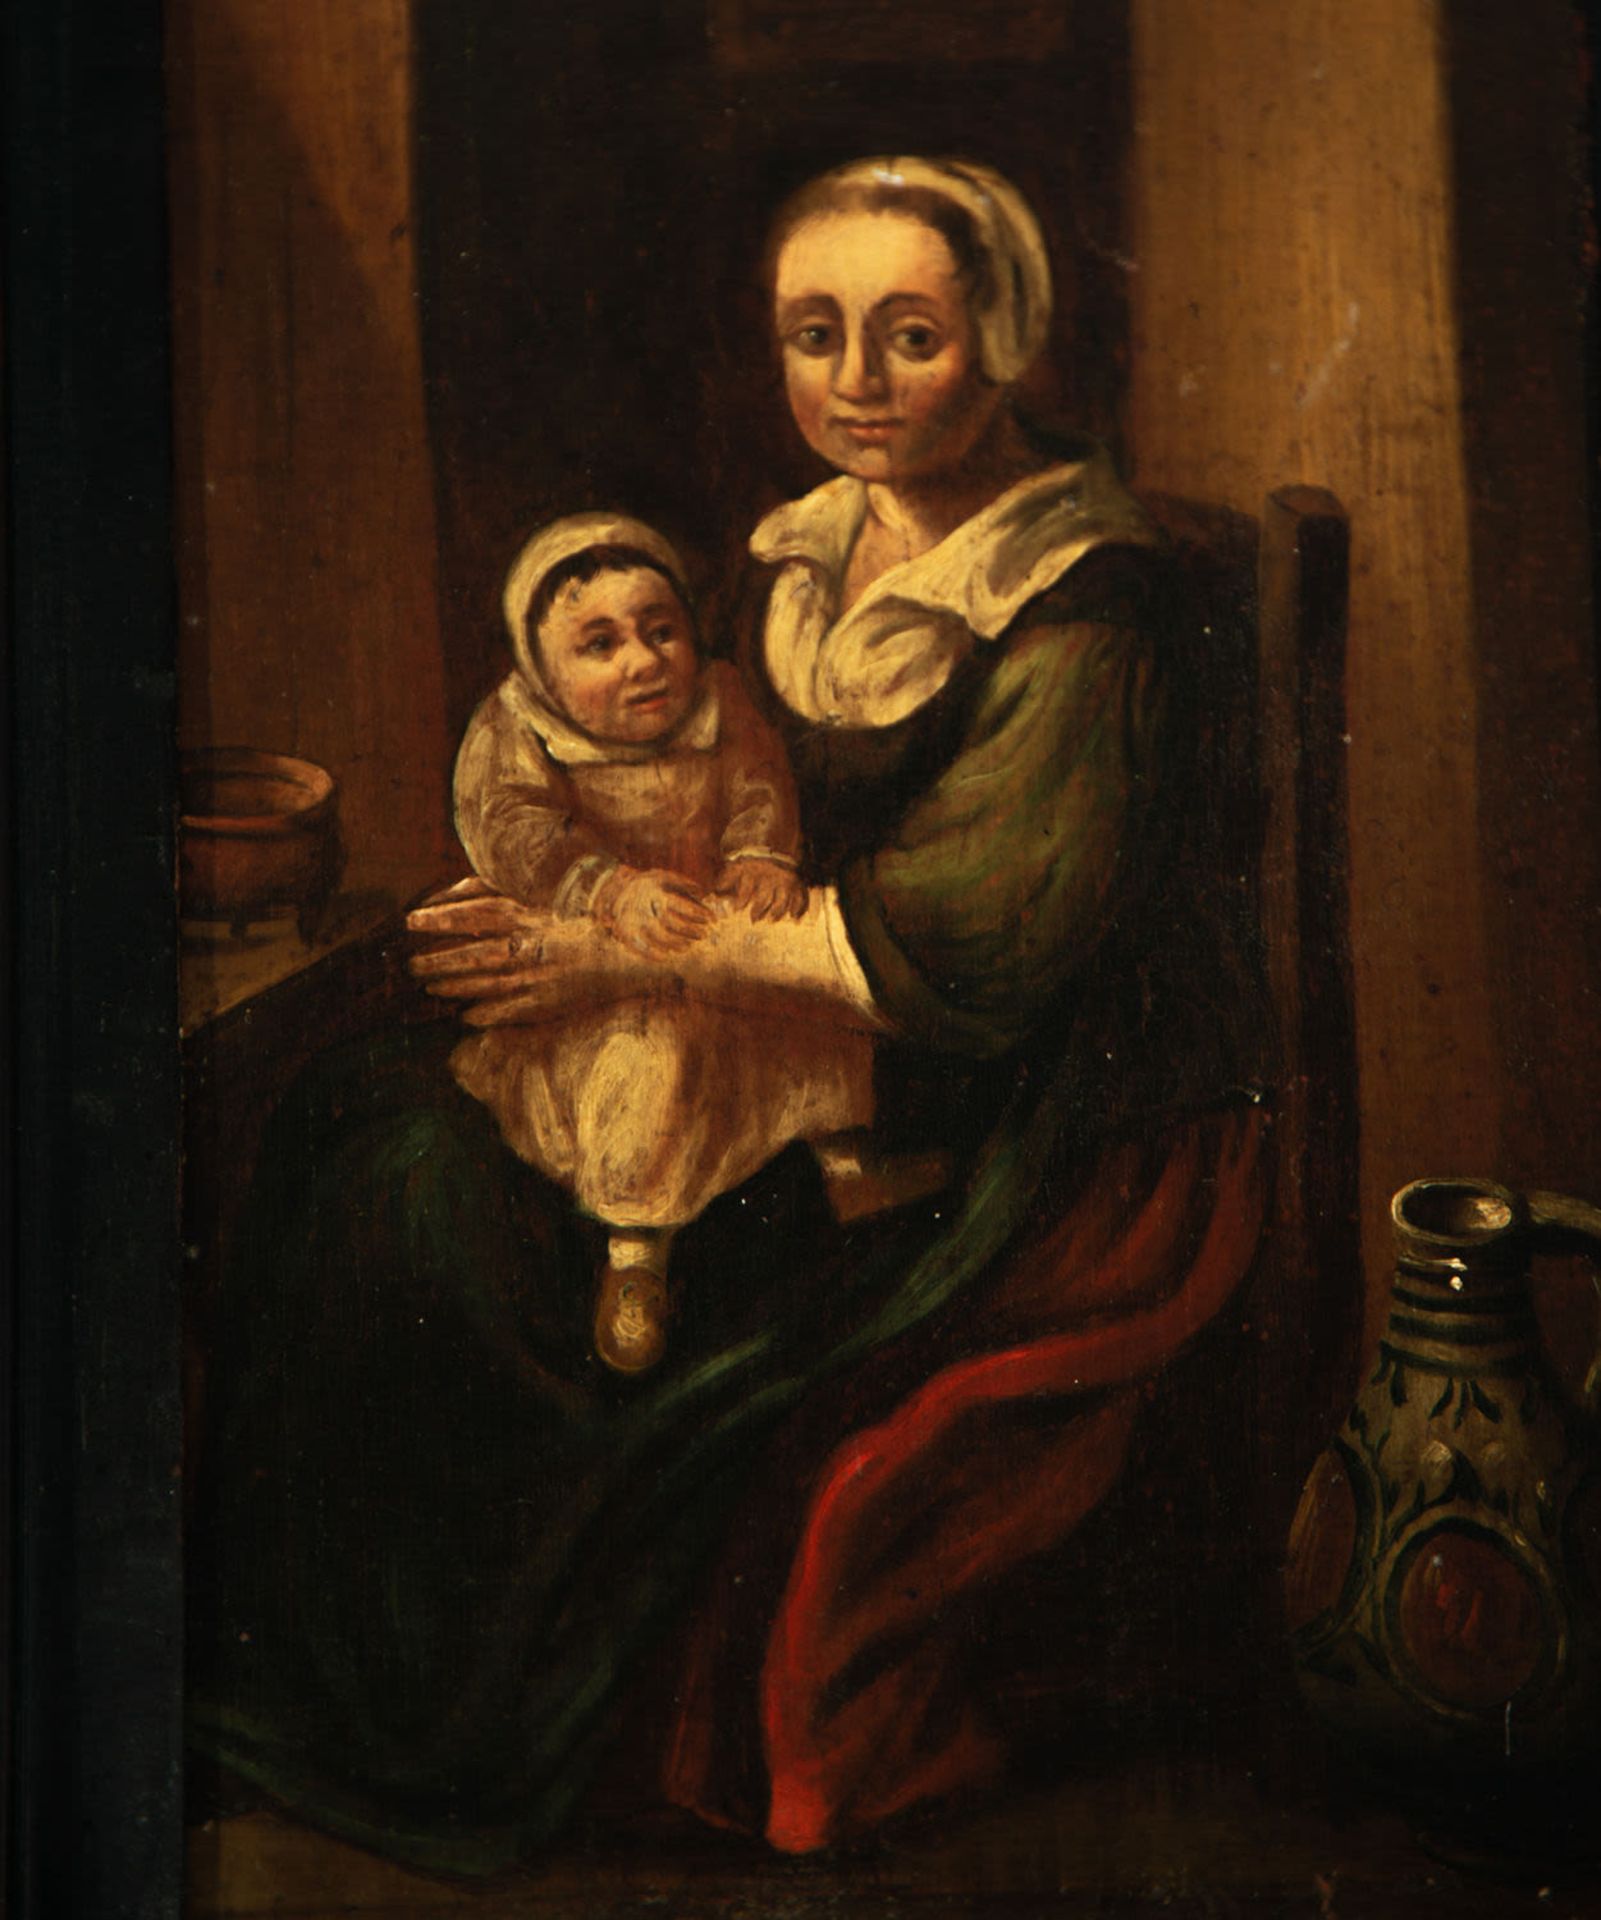 Woman with child, 17th century Flemish school - Image 2 of 5